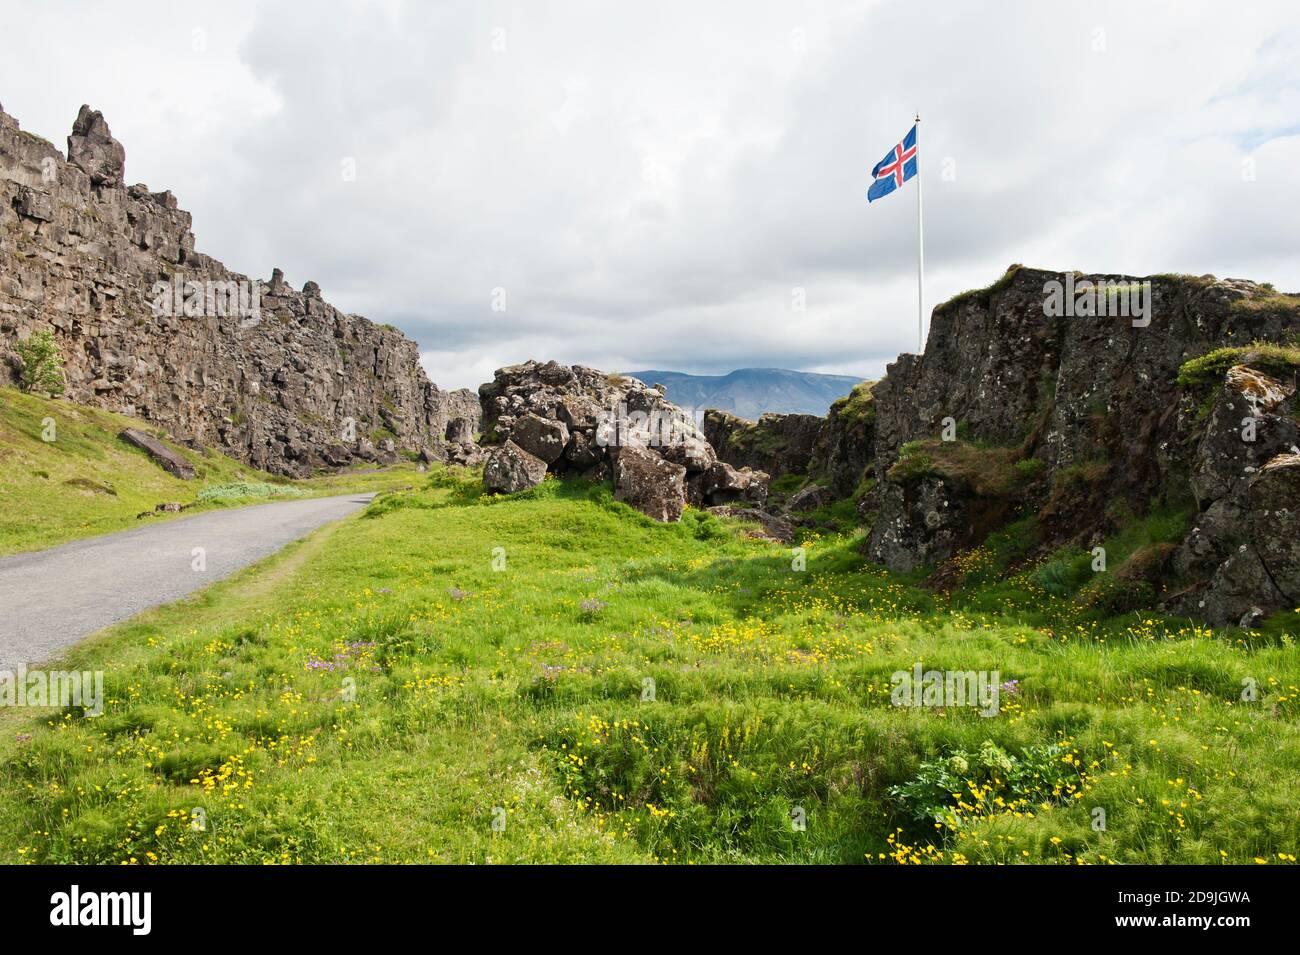 Location of Althing, the oldest parliament on the Earth, is marked by Icelandic flag. Thingvellir national park, Iceland Stock Photo